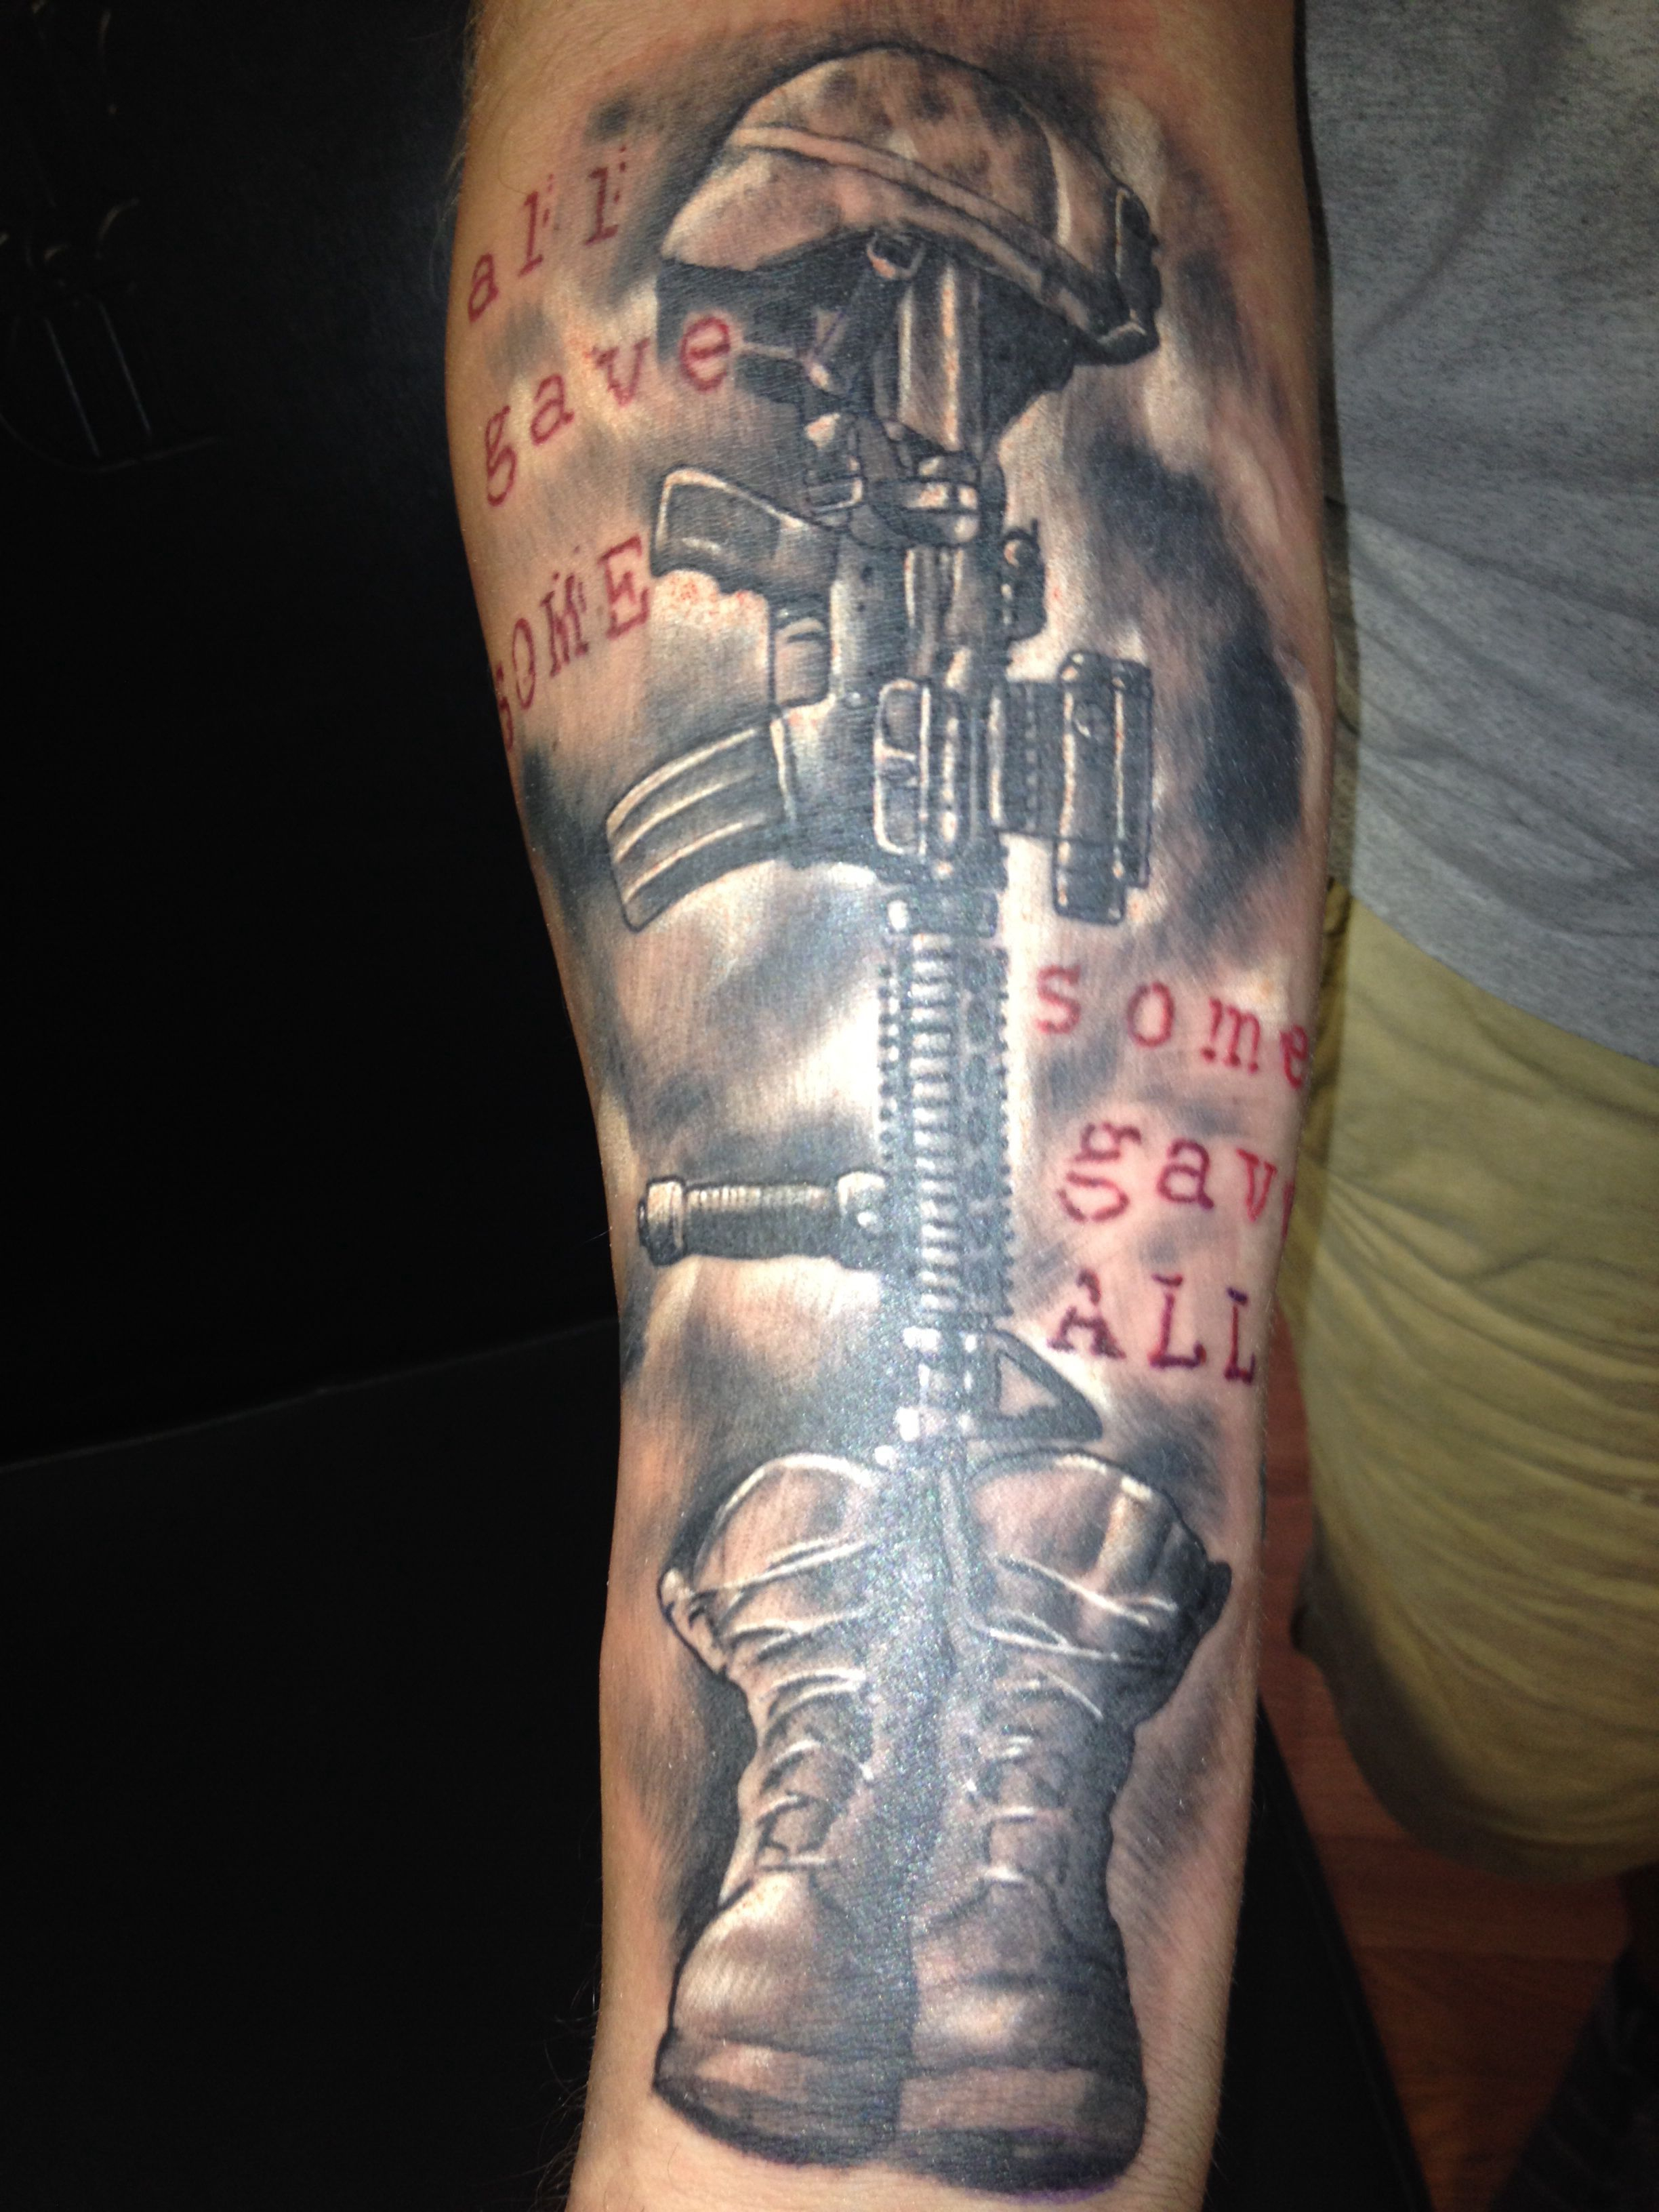 Soldiers Cross Tattoo Tattoos Arm Sleeve Tattoos Patriotic Tattoos intended for dimensions 2448 X 3264